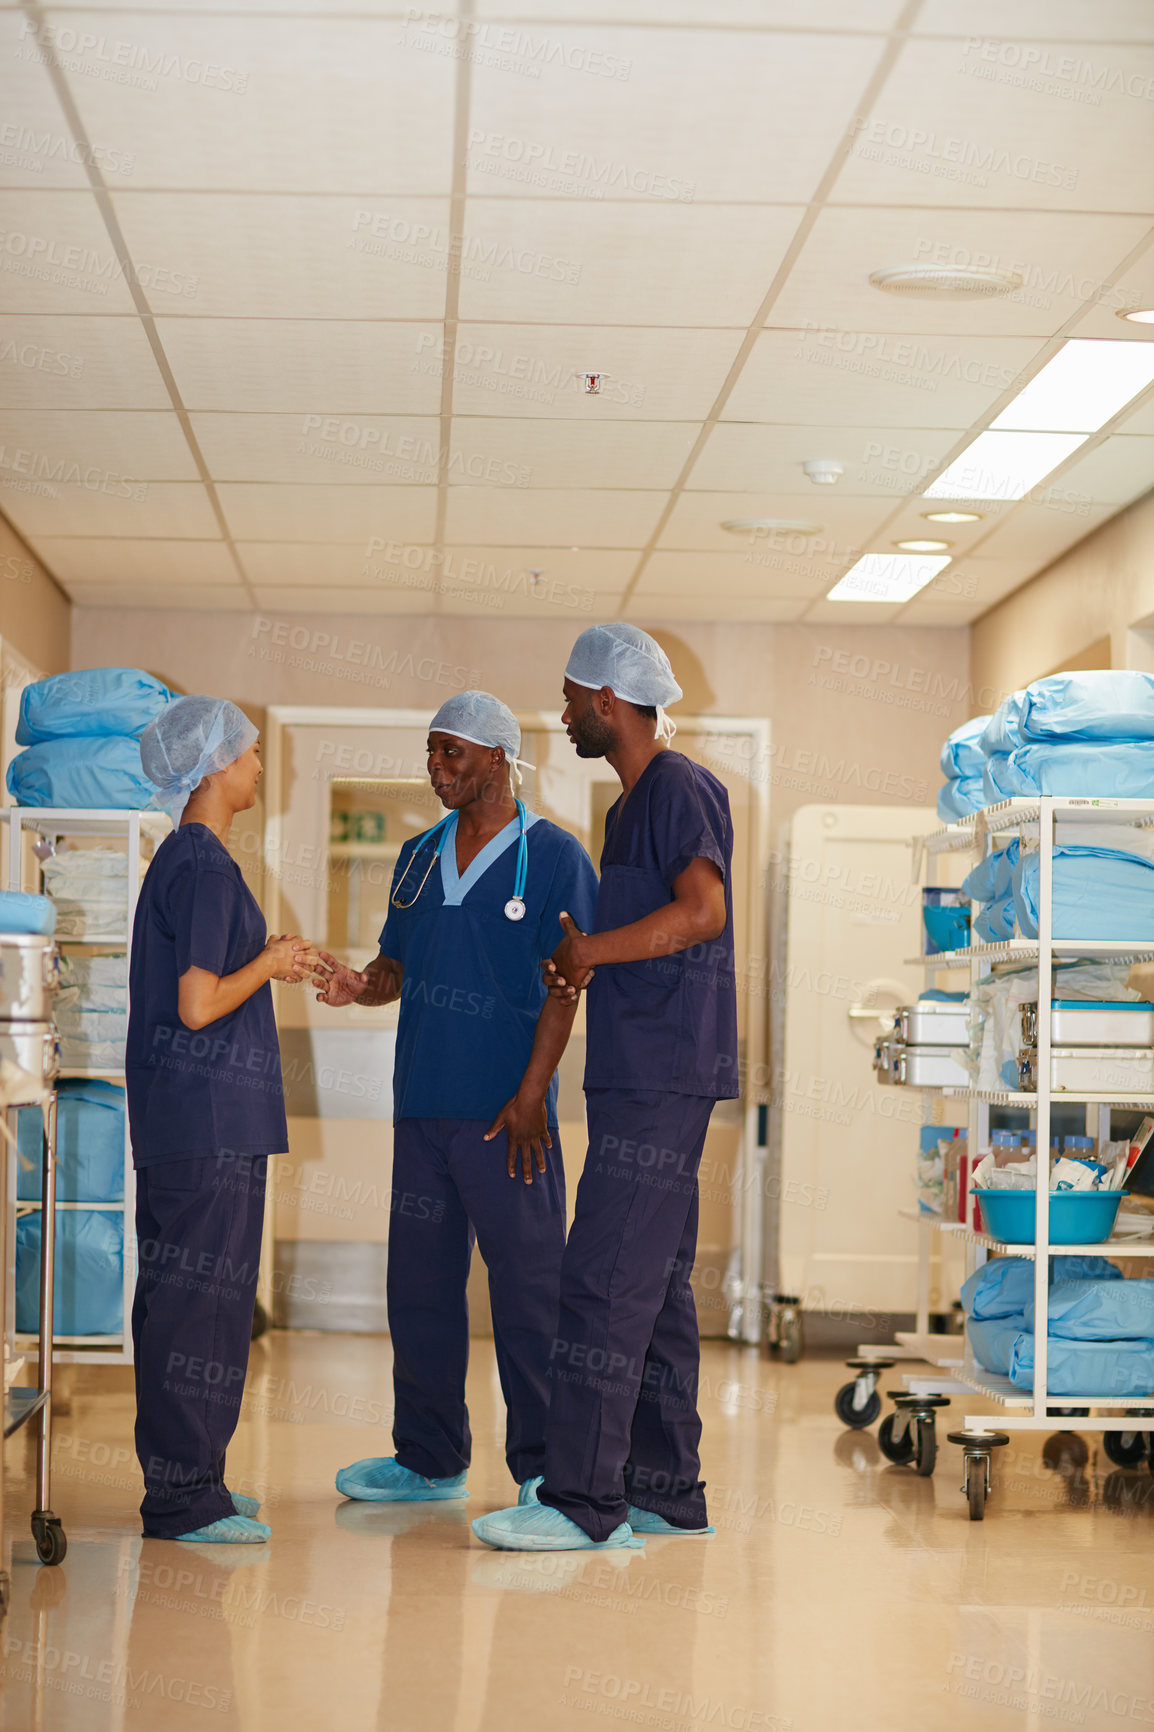 Buy stock photo Full length shot of medical staff in a hospital